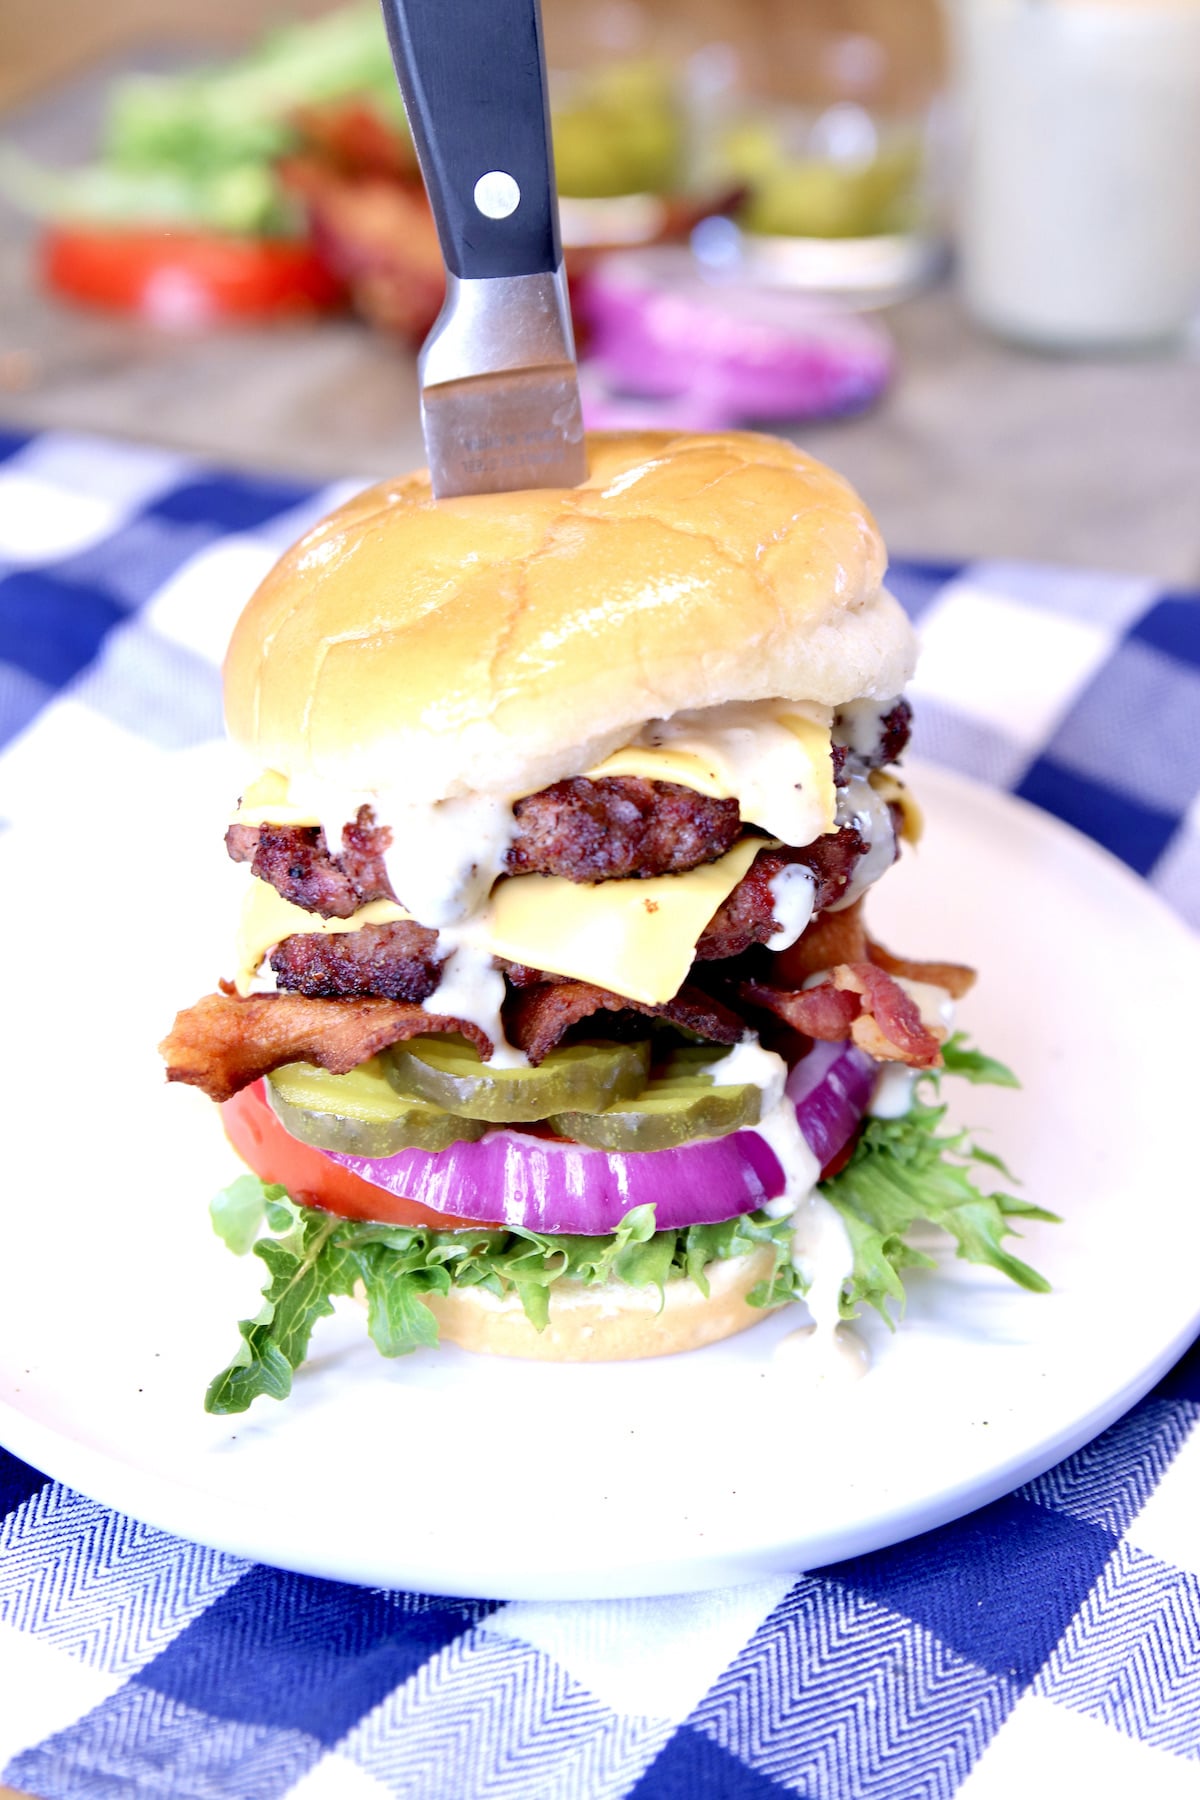 Bacon double cheeseburger on a plate with white bbq sauce, pickles, tomato, red onion.